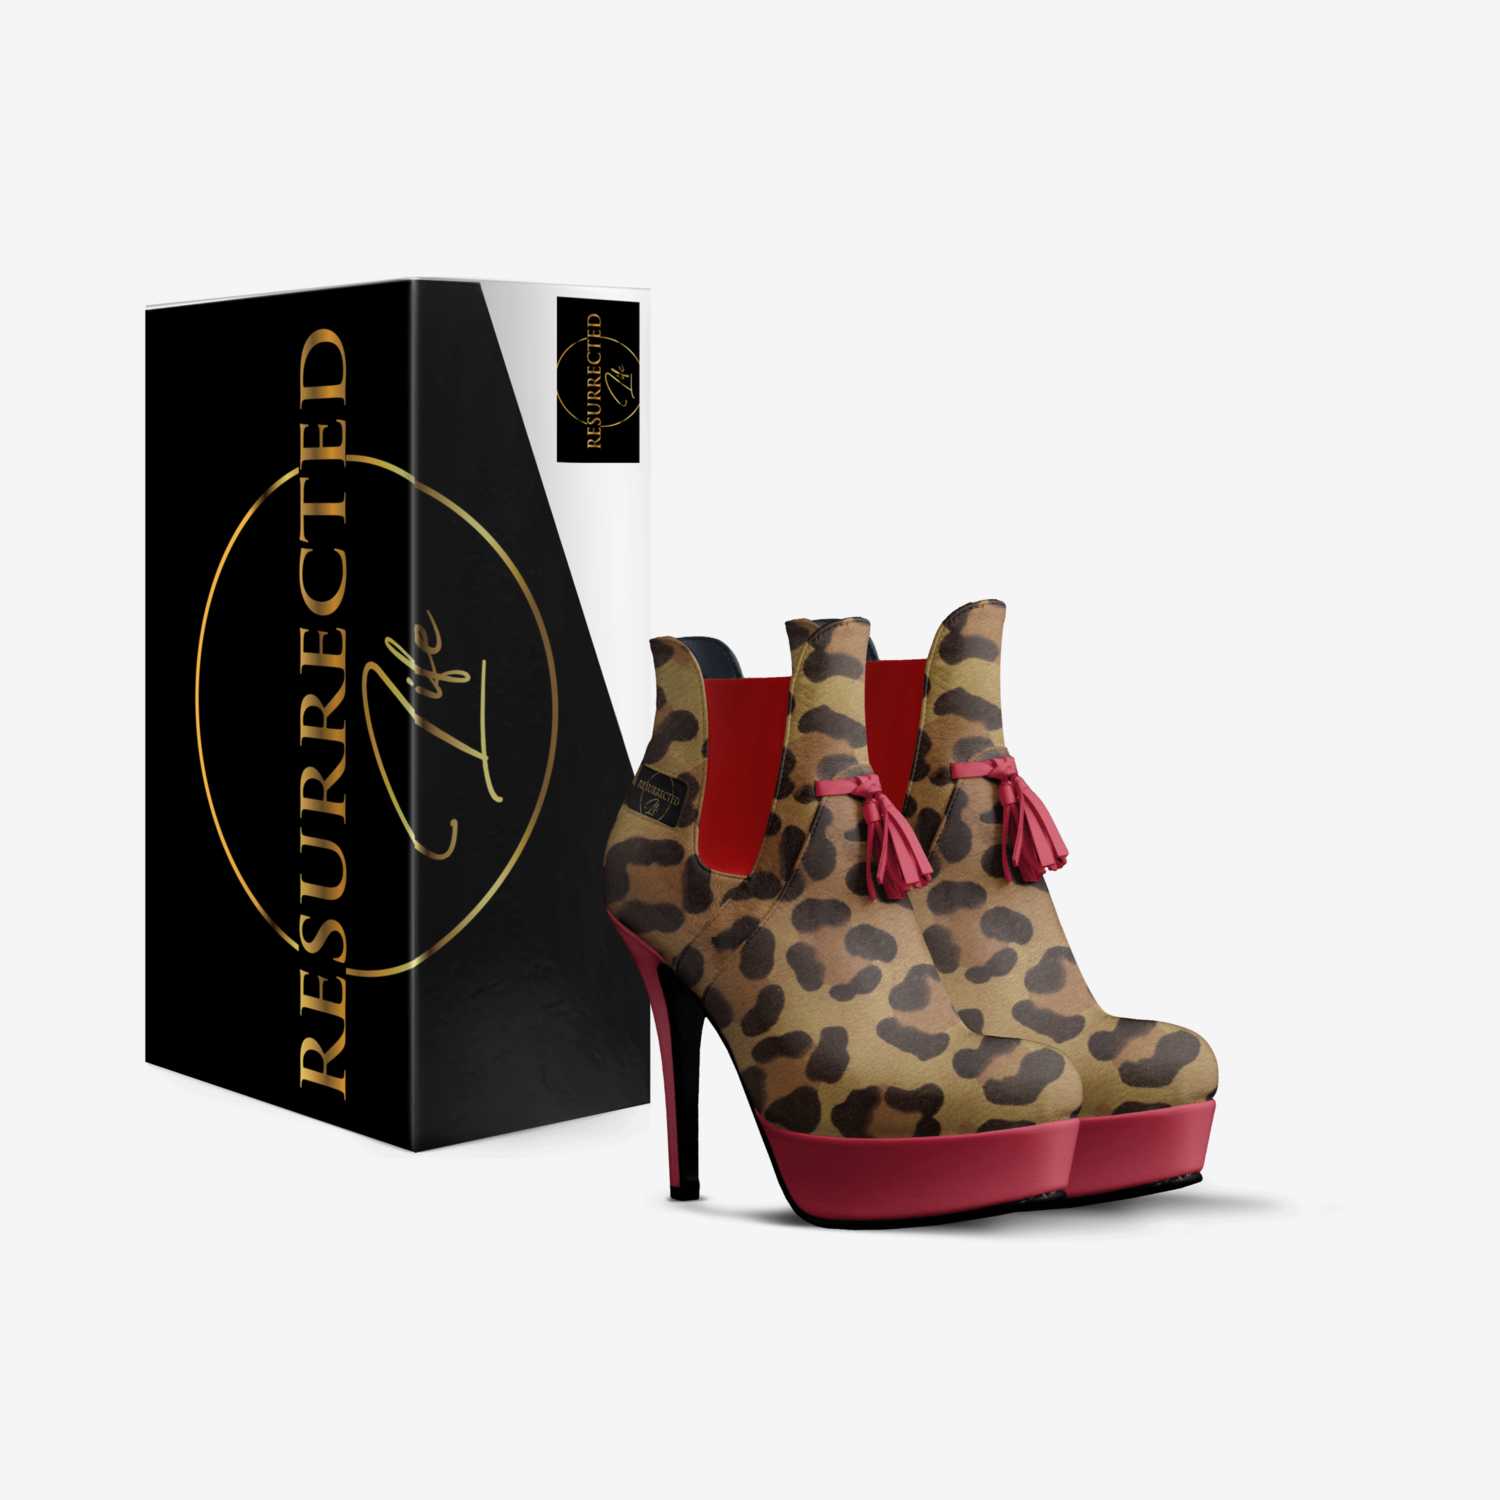 Virtuous Woman  custom made in Italy shoes by James Copeland | Box view